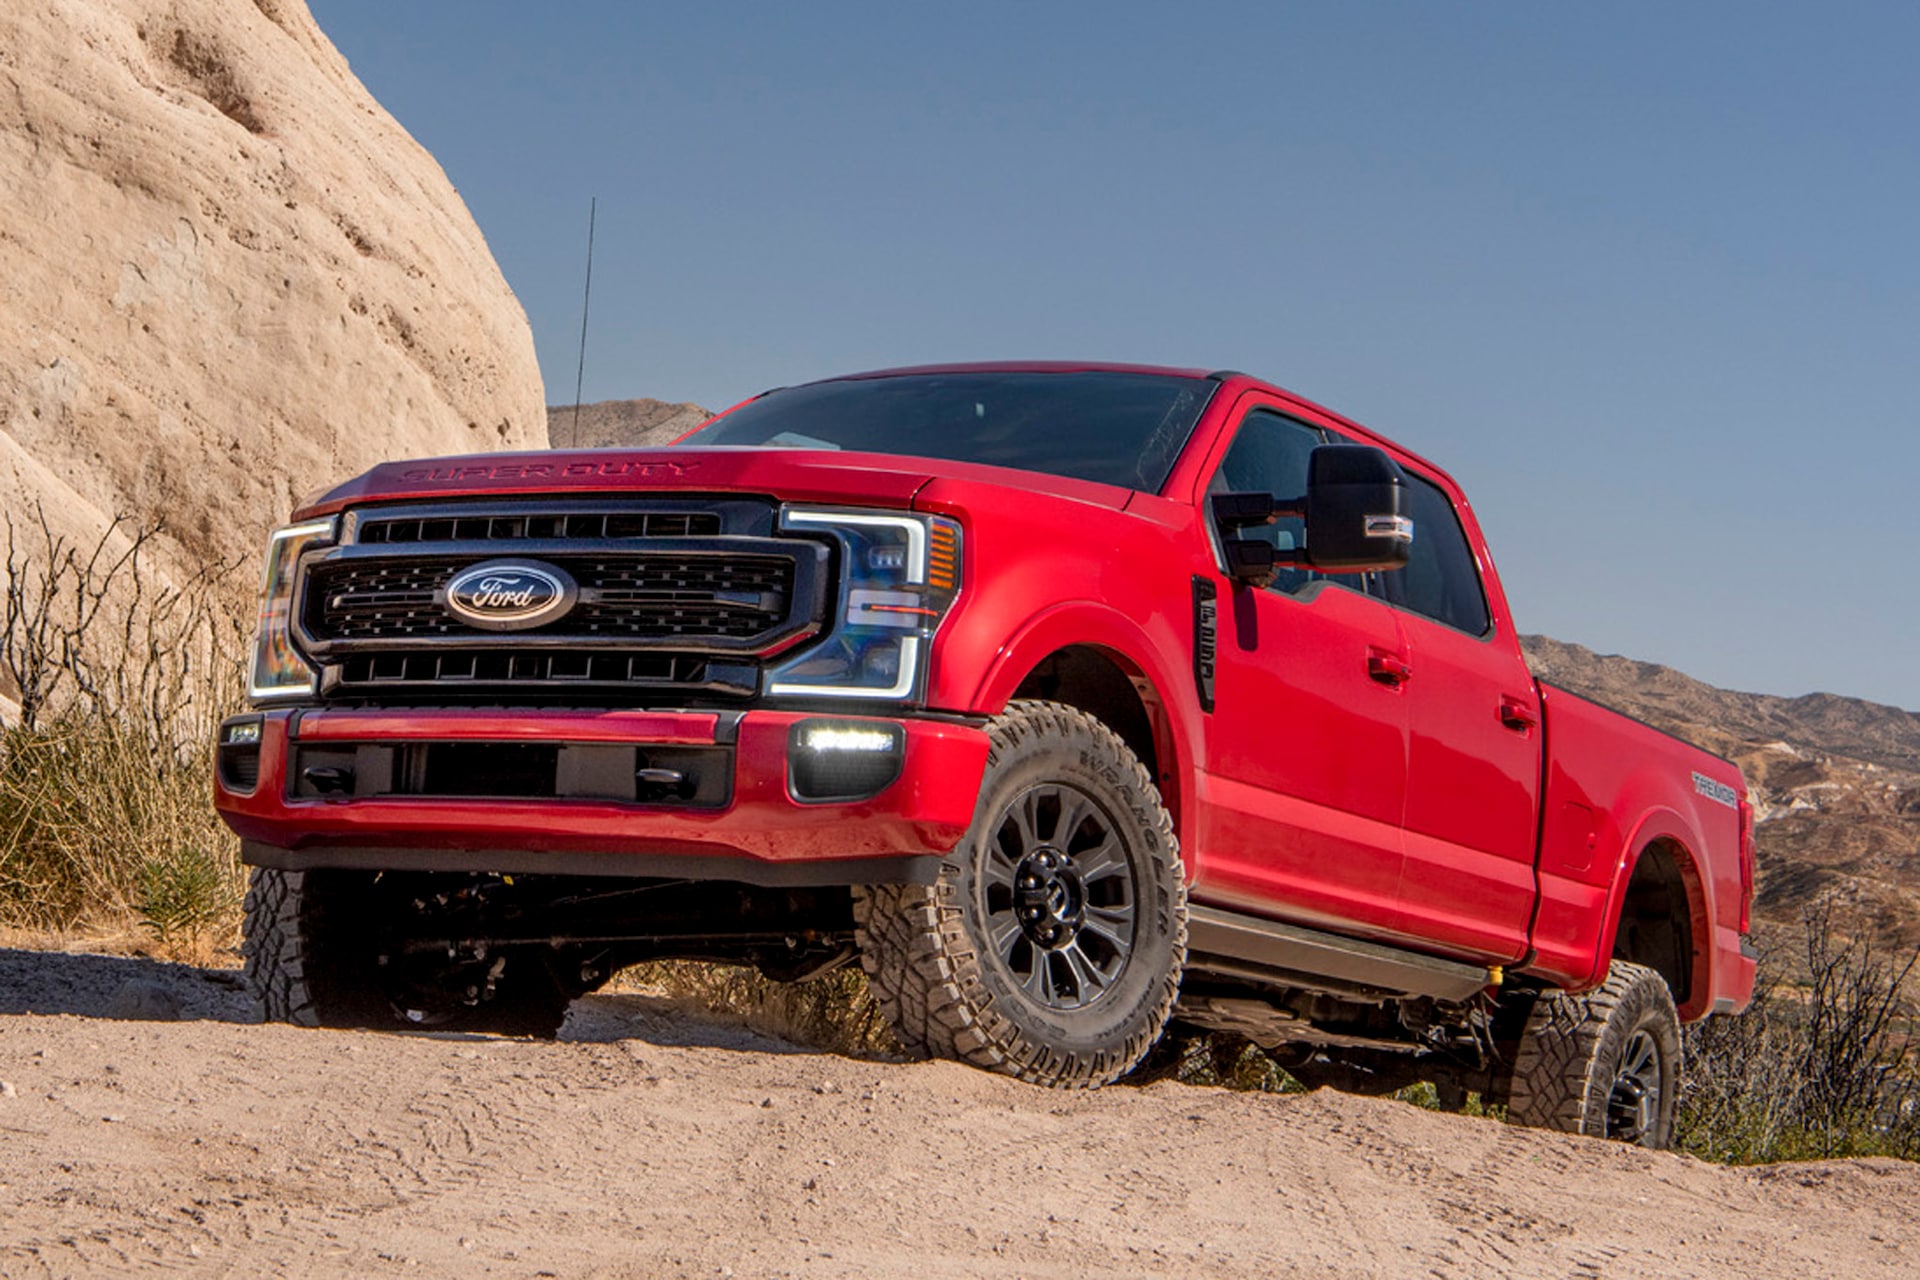 Ford F-250 Super Duty Tremor: Just a Big, Lifted Truck